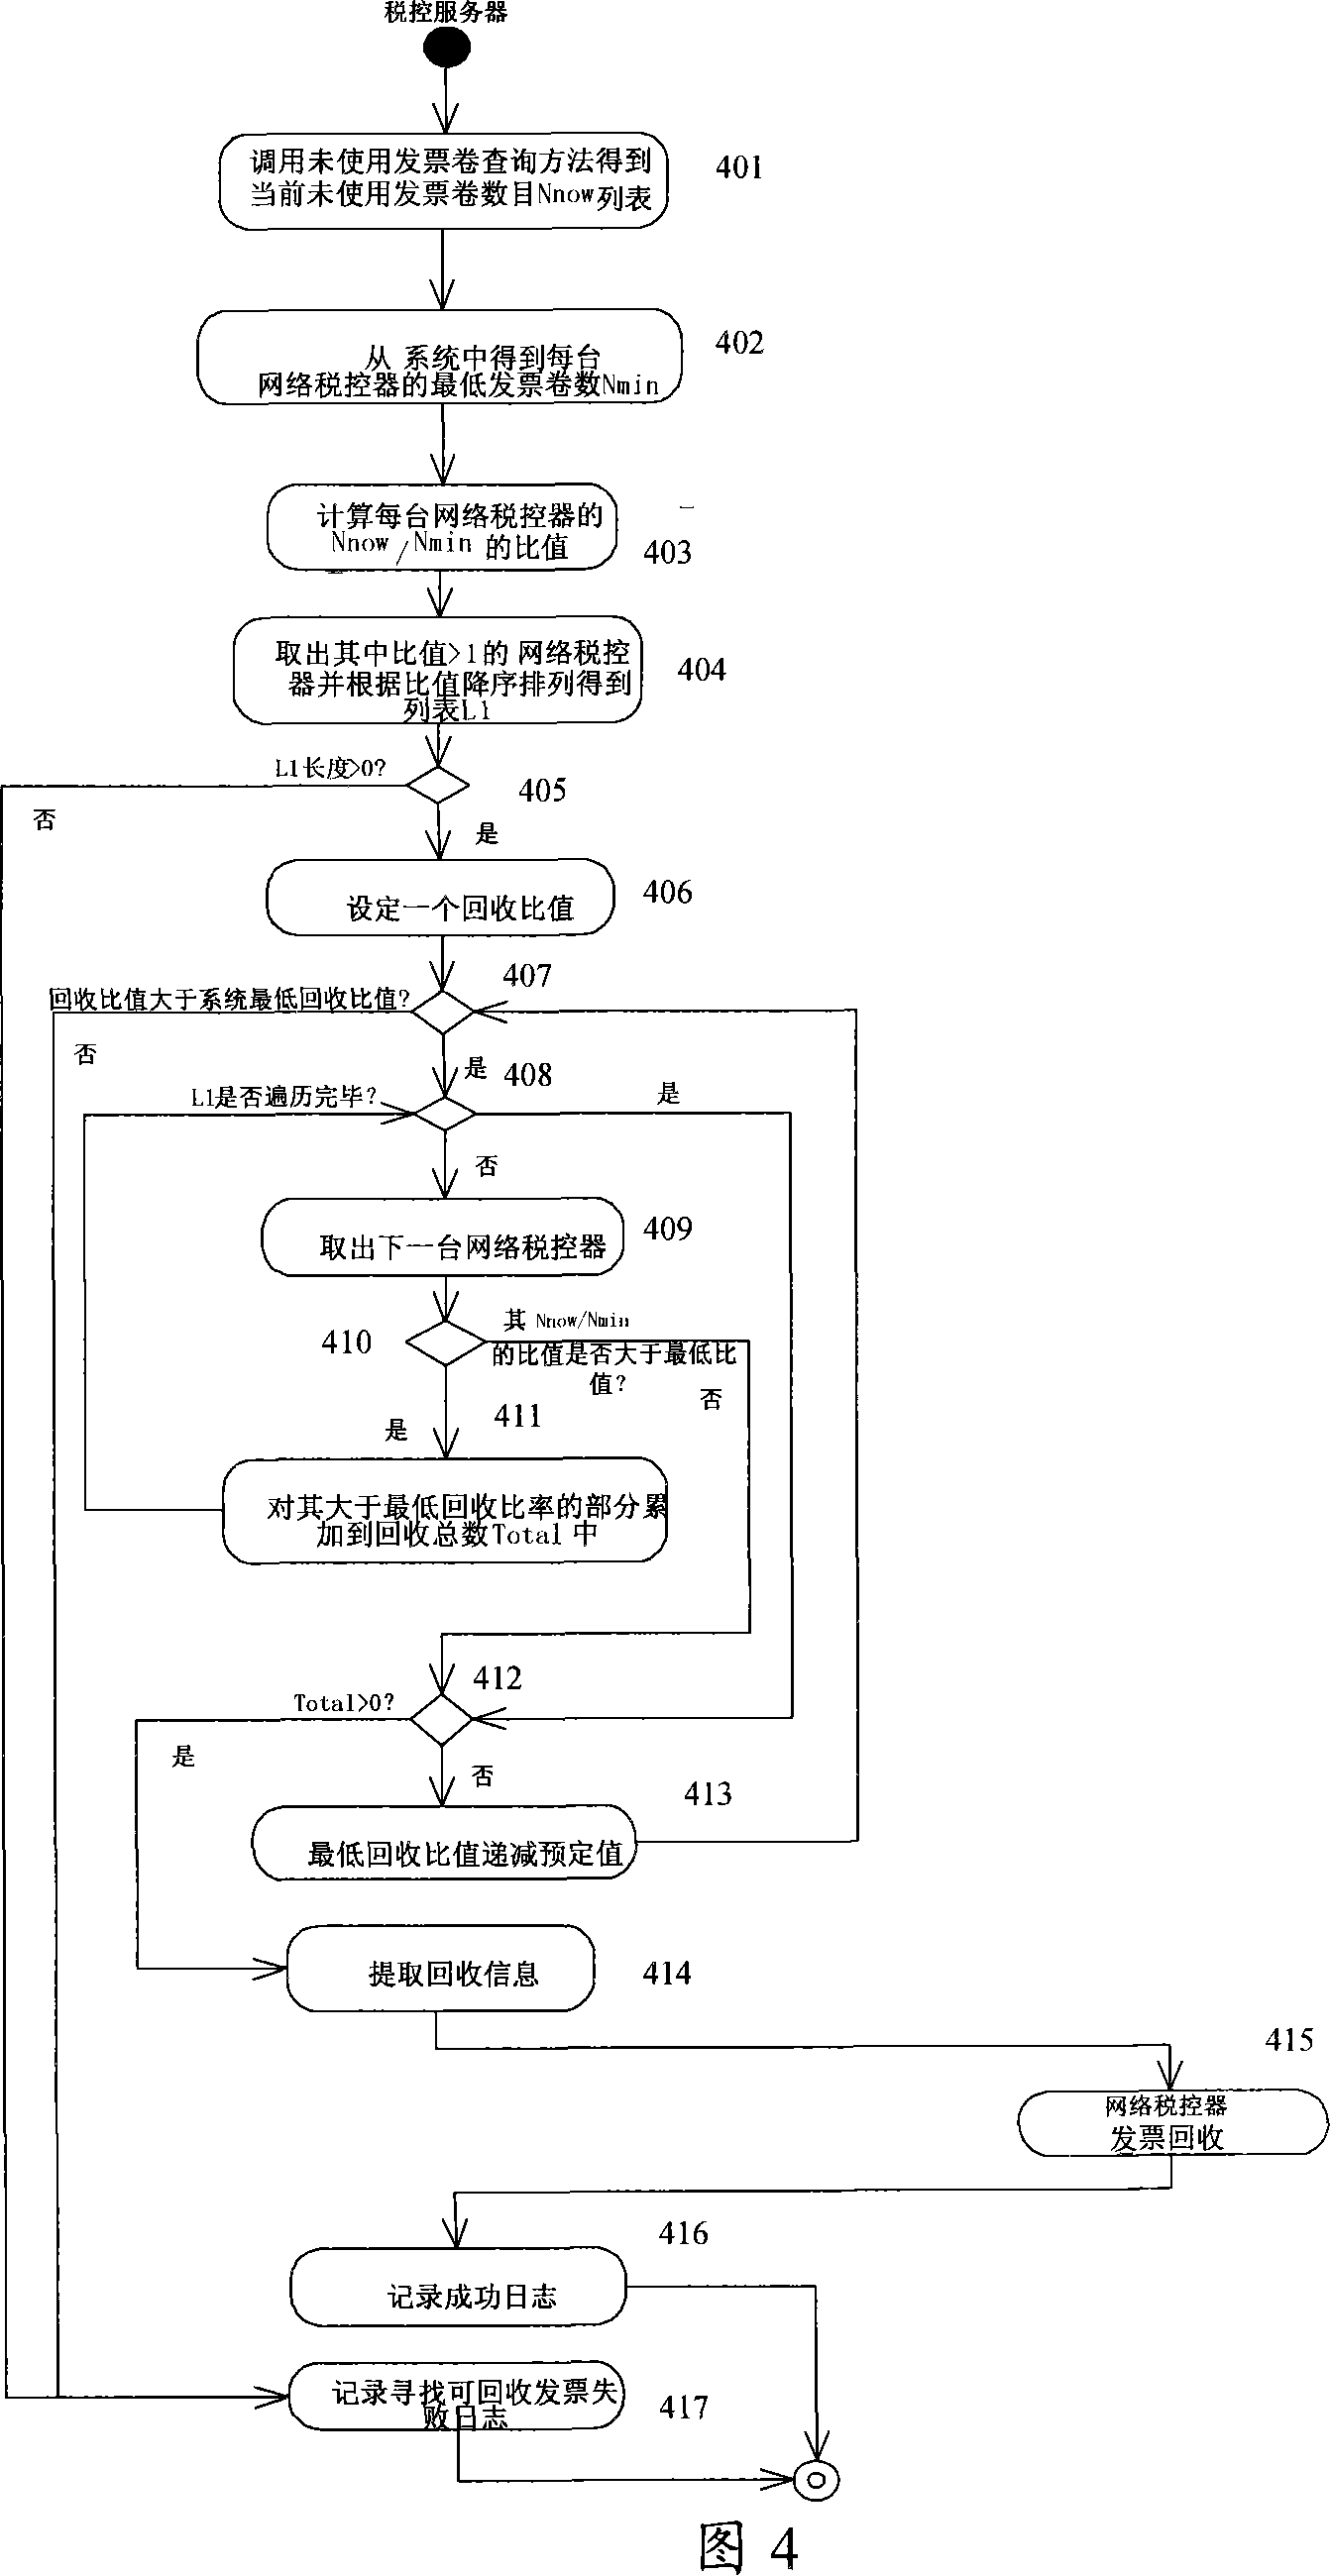 Invoices processing method of network tax control system